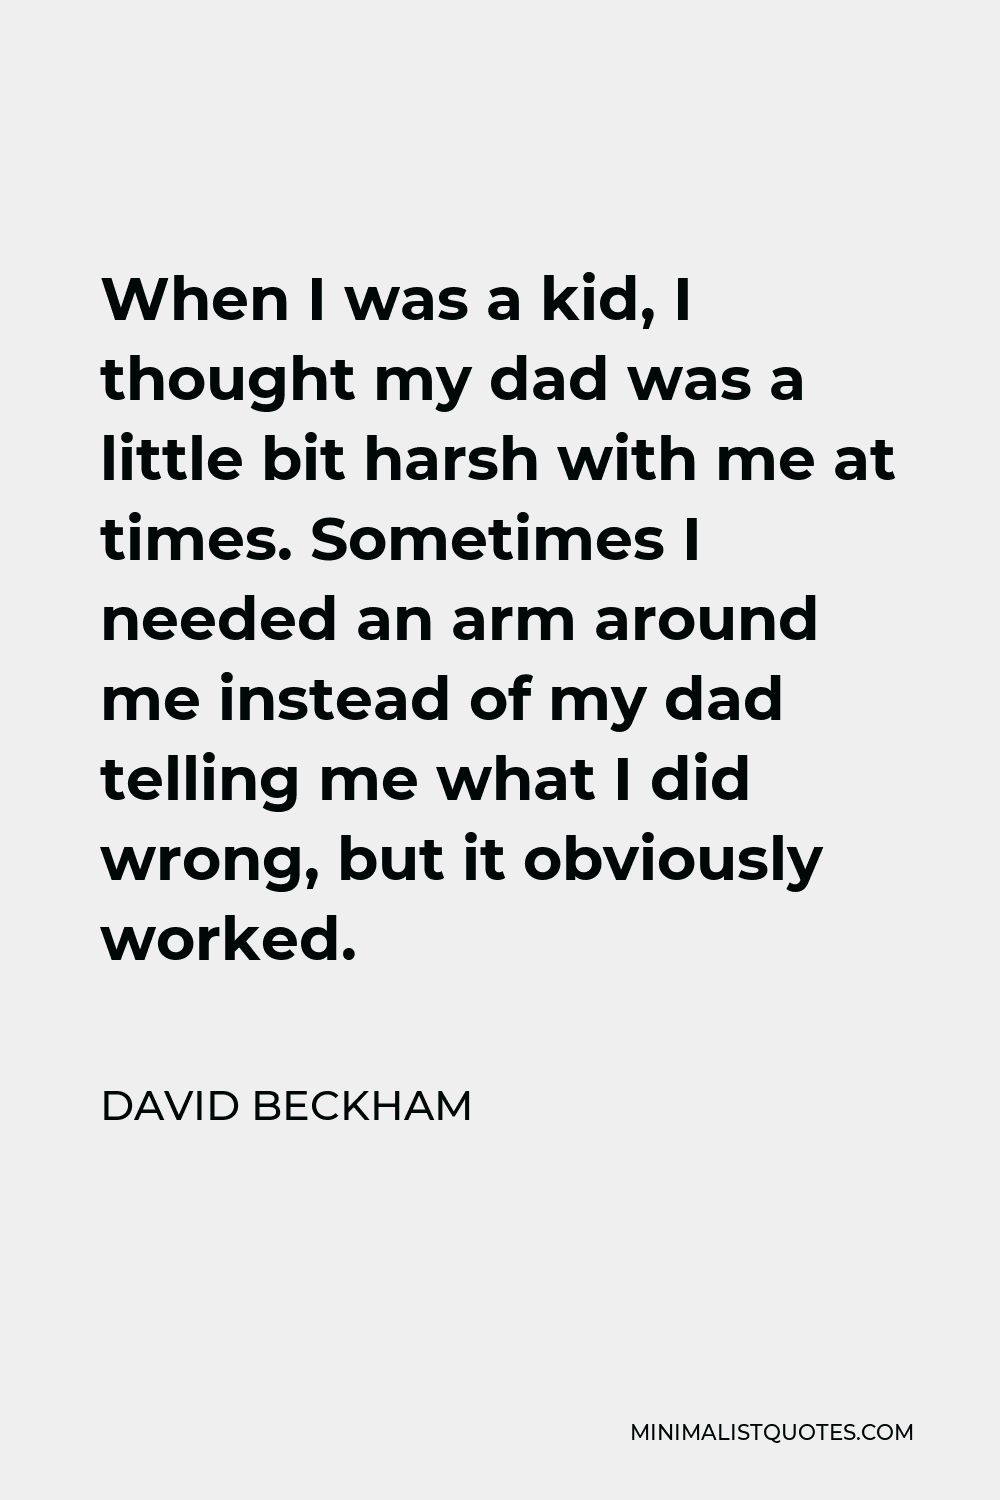 David Beckham Quote - When I was a kid, I thought my dad was a little bit harsh with me at times. Sometimes I needed an arm around me instead of my dad telling me what I did wrong, but it obviously worked.